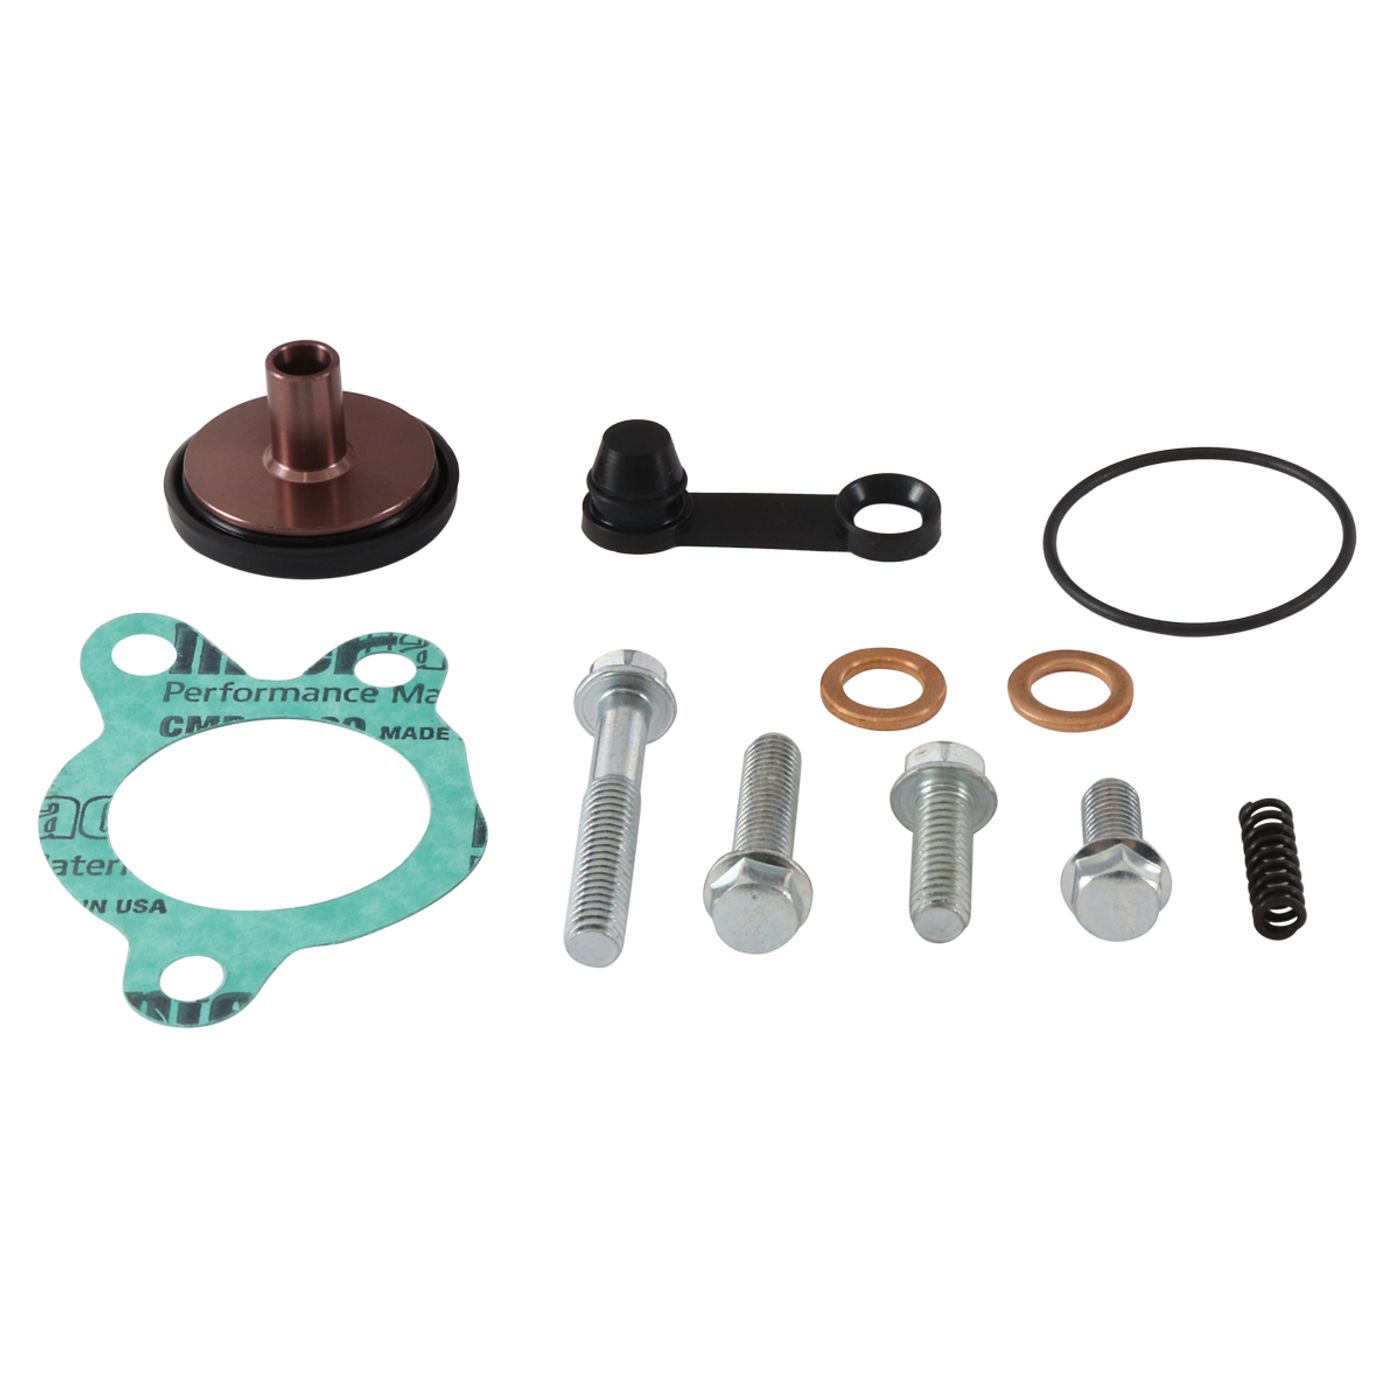 Wrp Clutch Slave Cylinder Kits - WRP186014 image